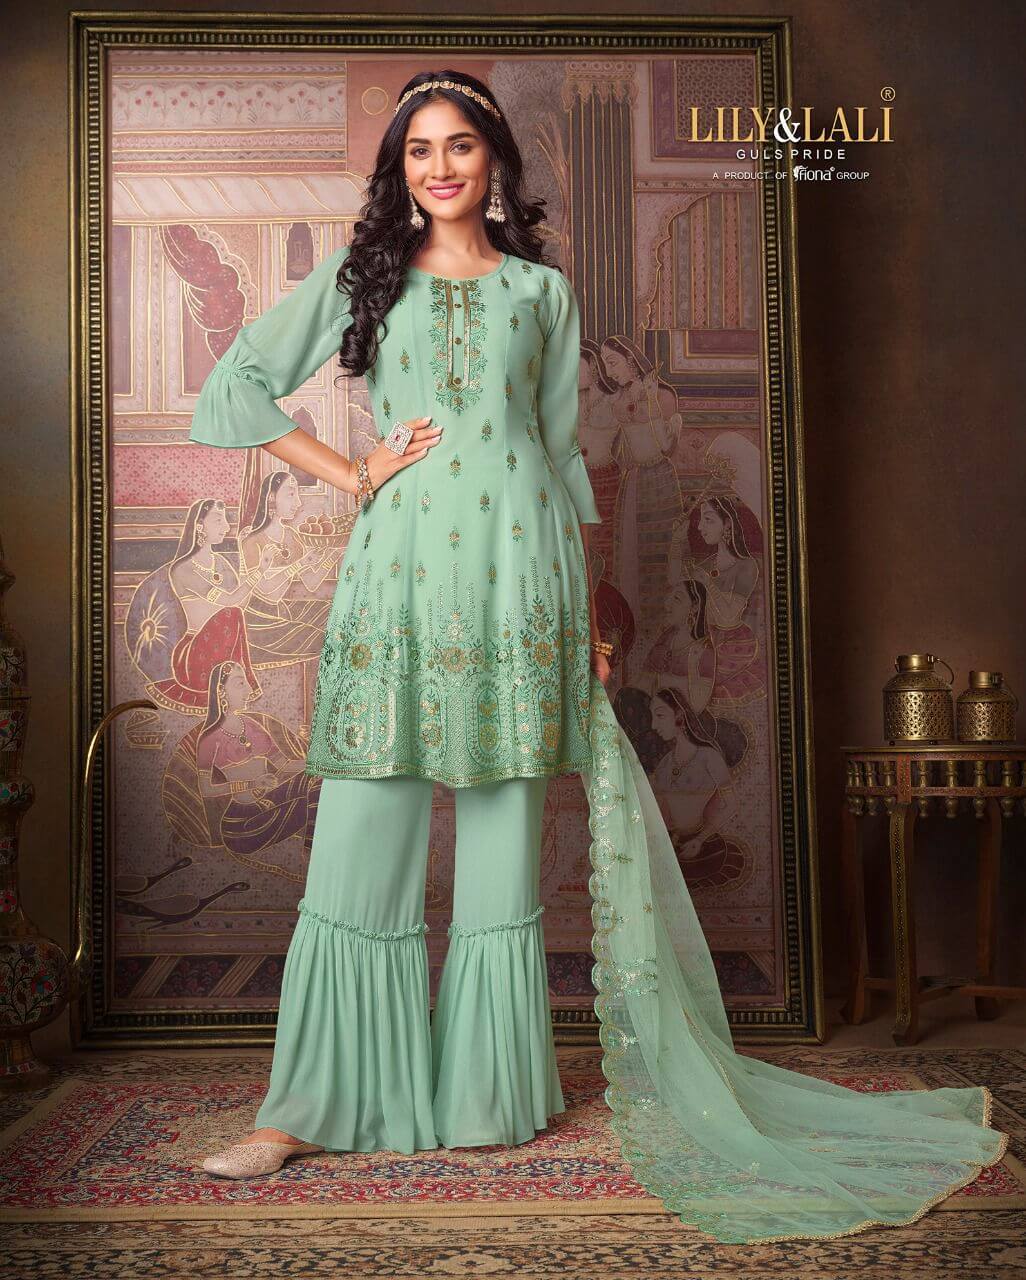 Lily and Lali Arizona Designer Wedding Party Salwar Suits collection 4